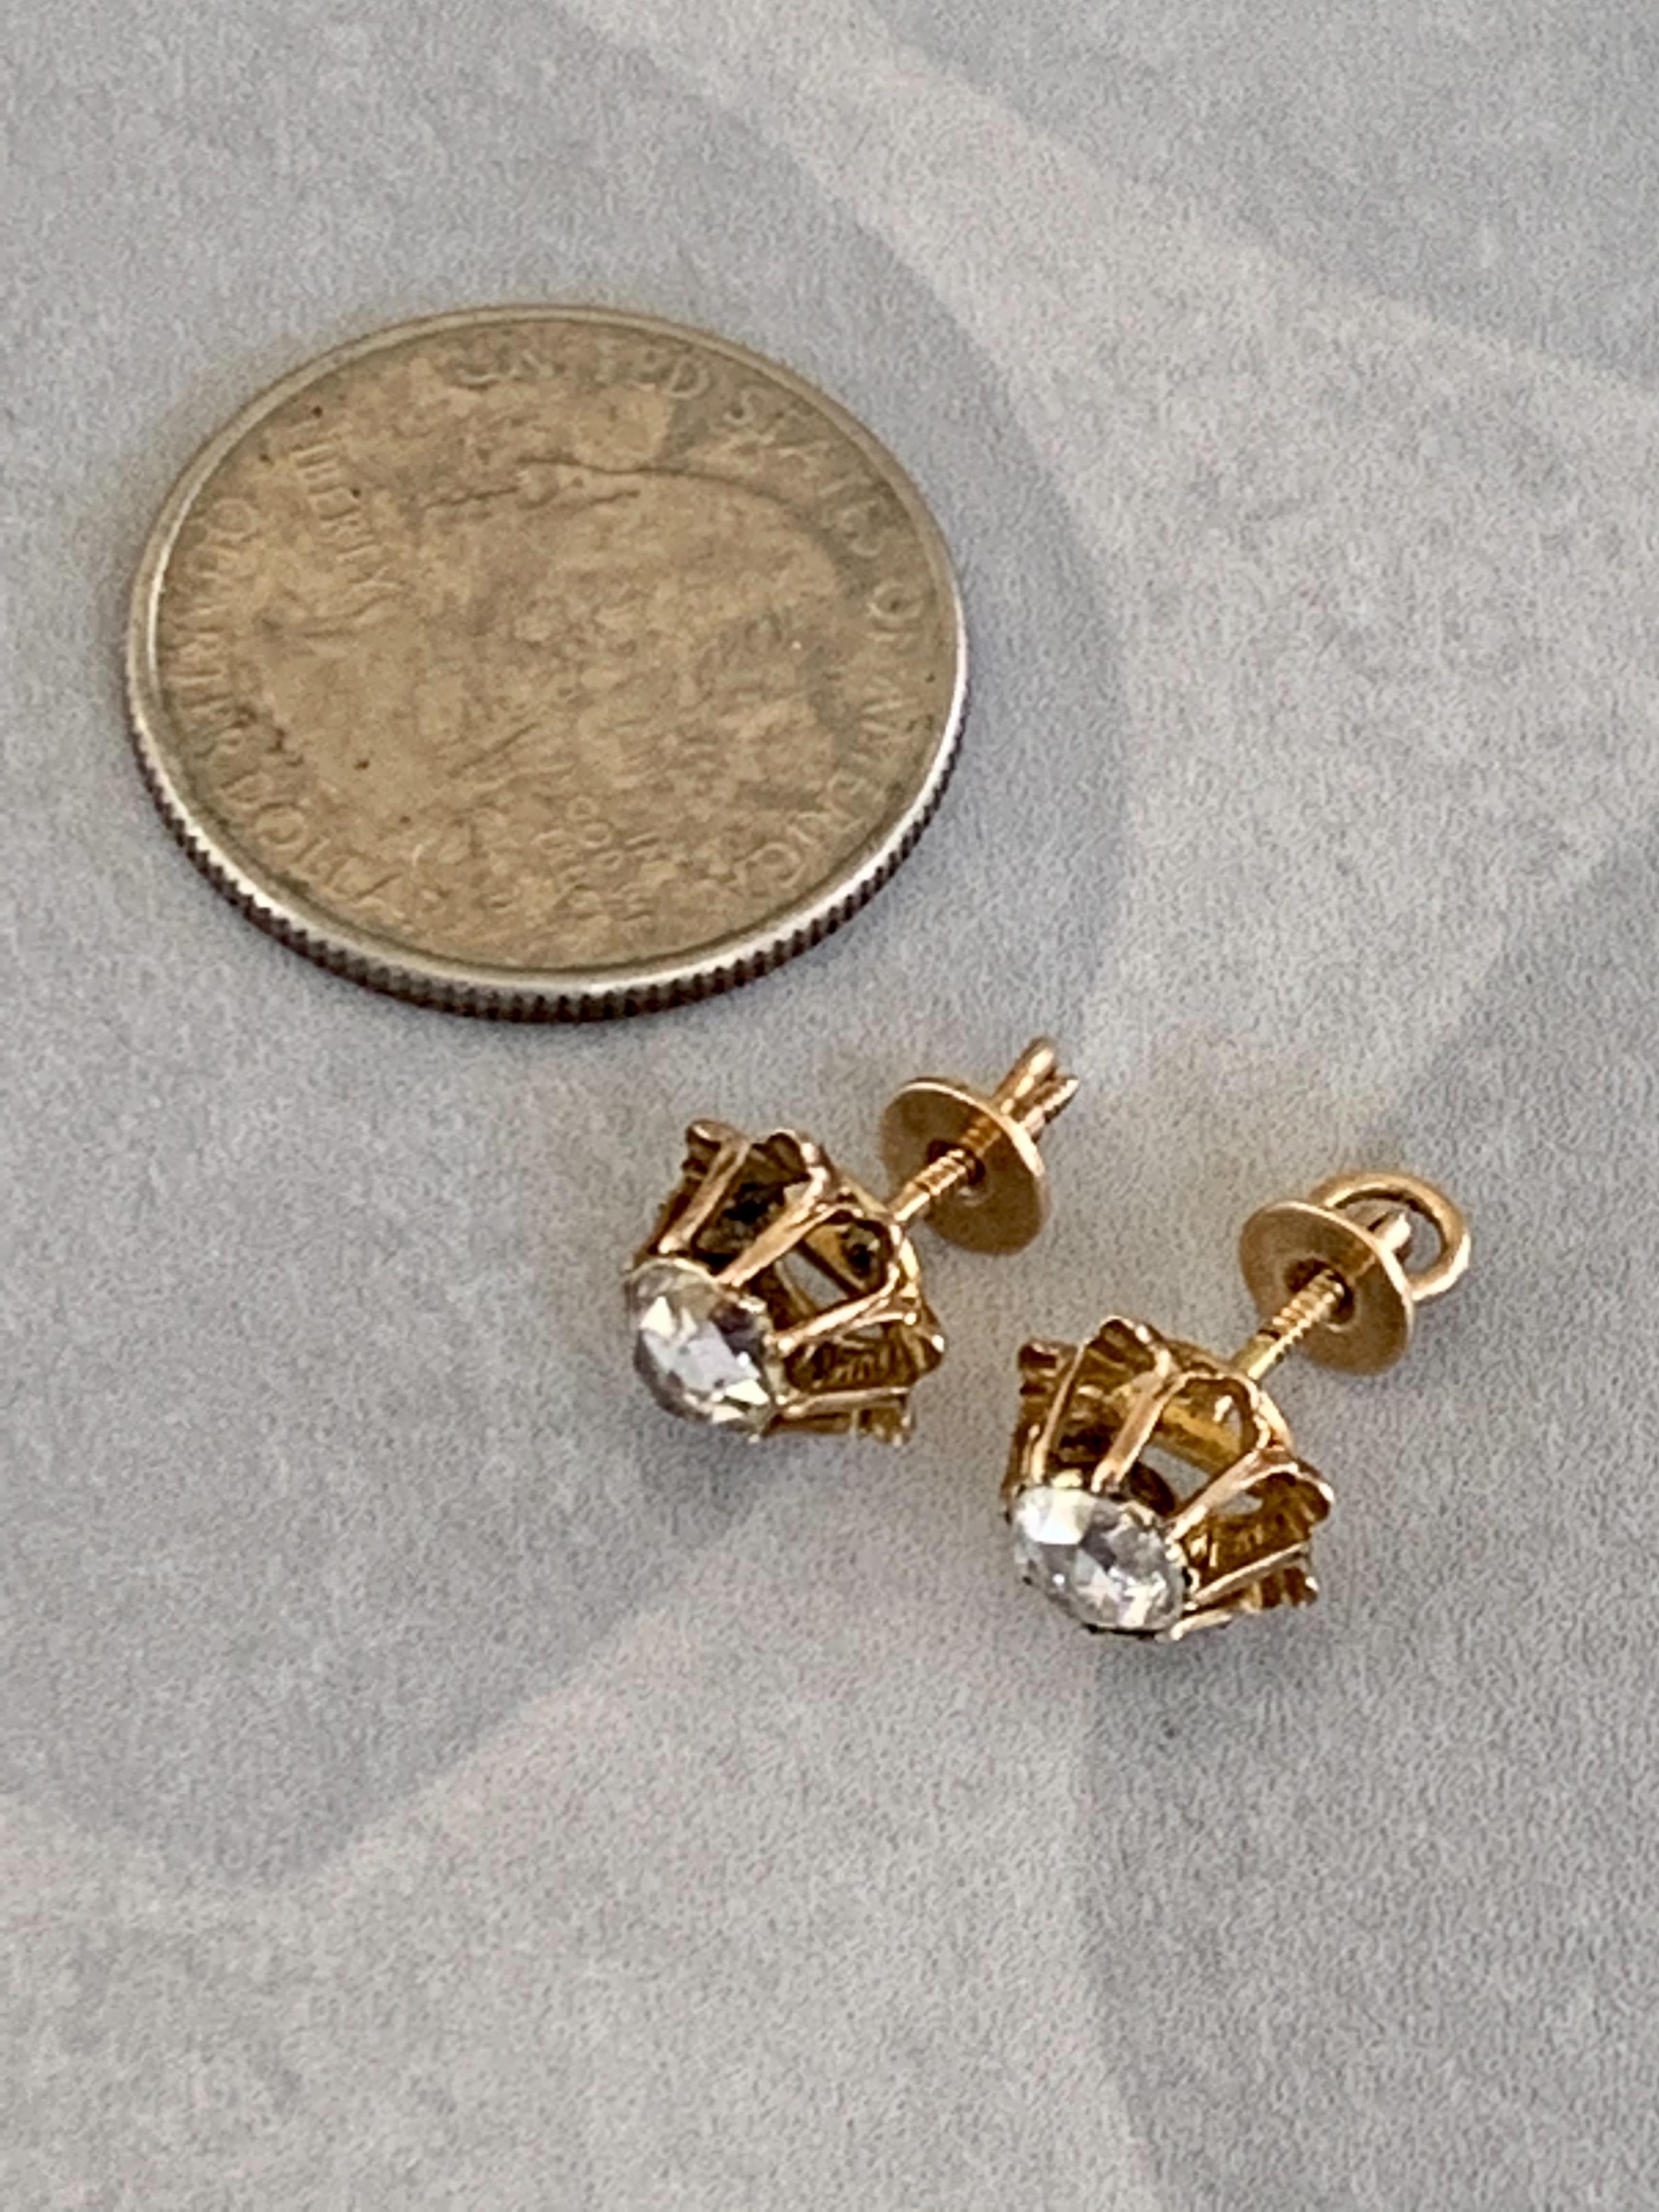 Antique Rose Cut Diamond 14 Karat Yellow Gold Screw Back Earrings In Good Condition For Sale In St. Louis Park, MN